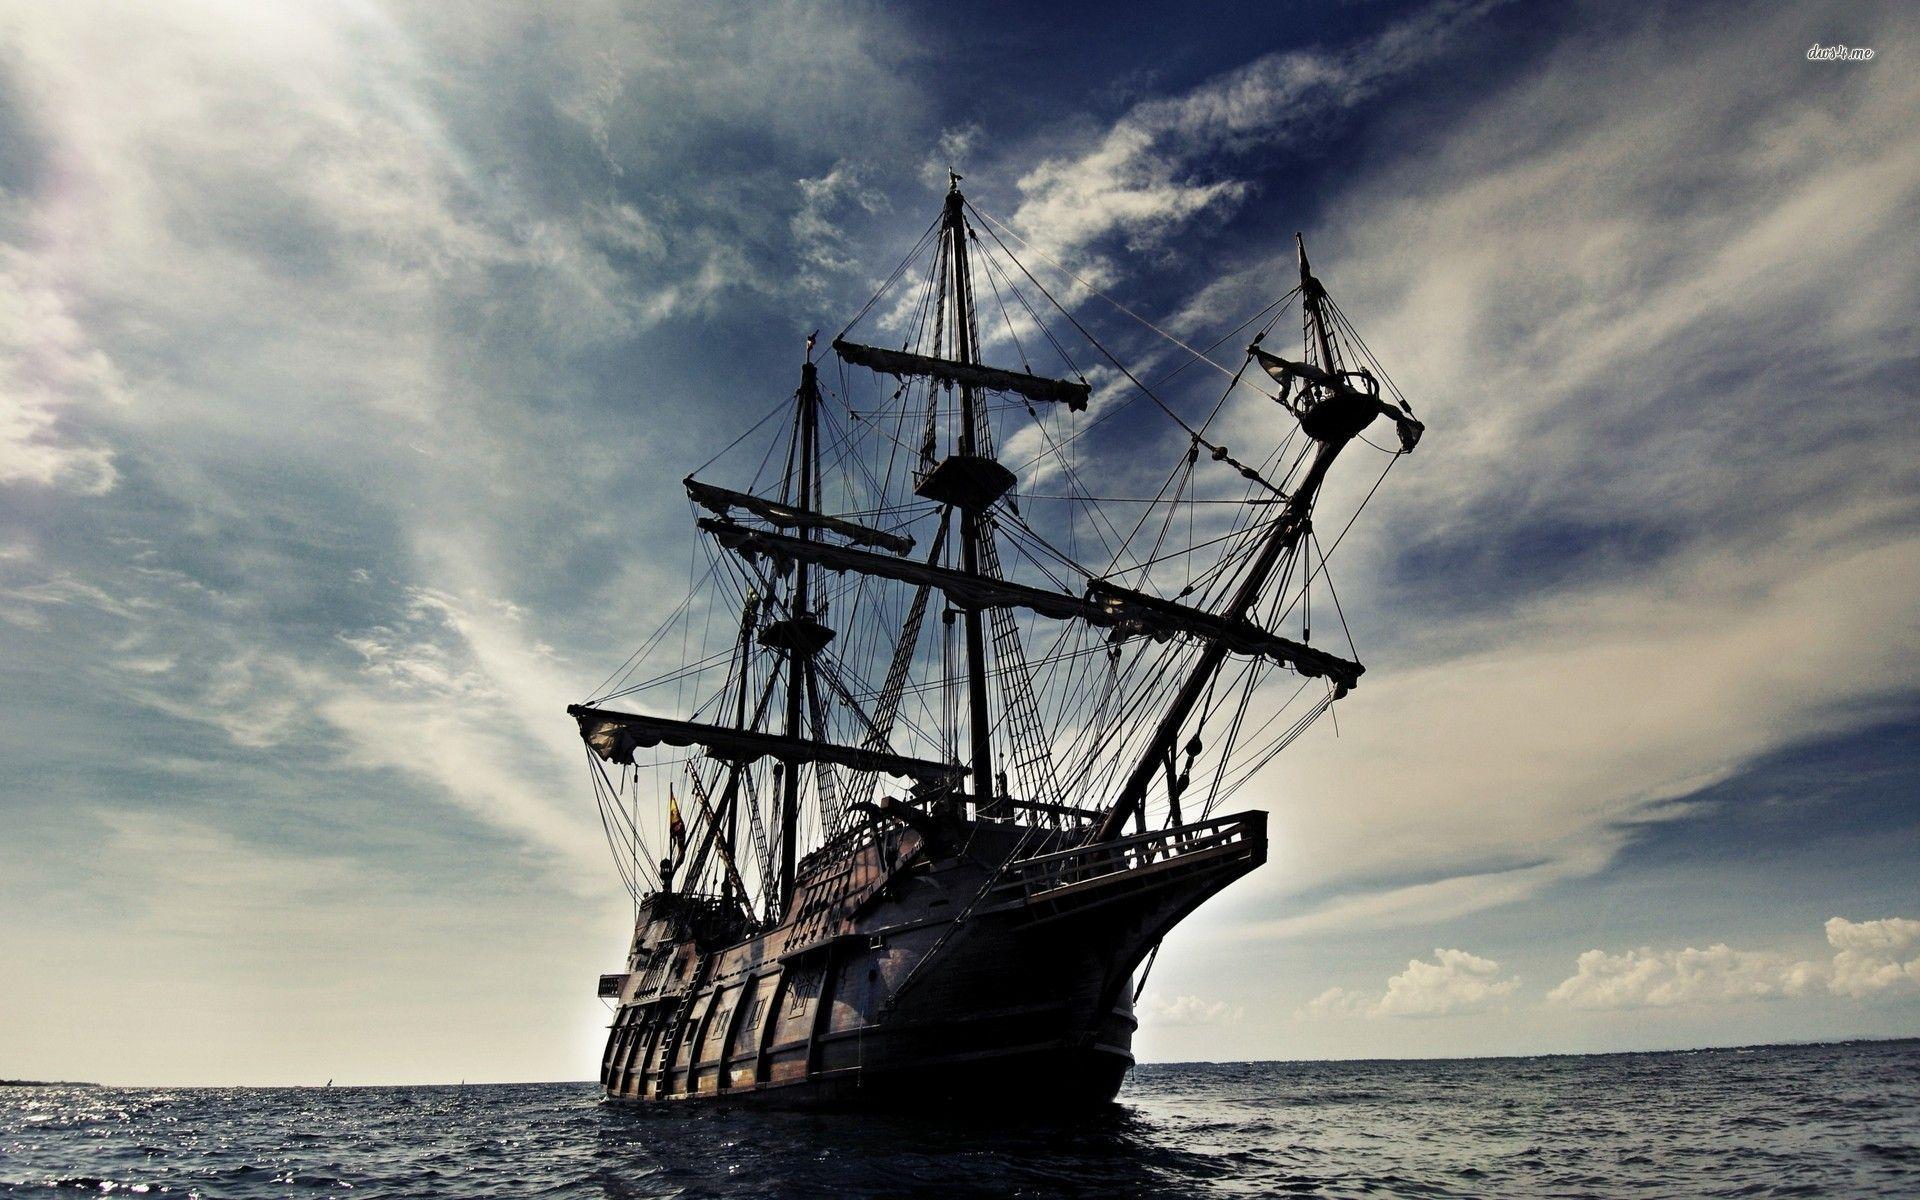 A large ship is sailing in the ocean - Pirate